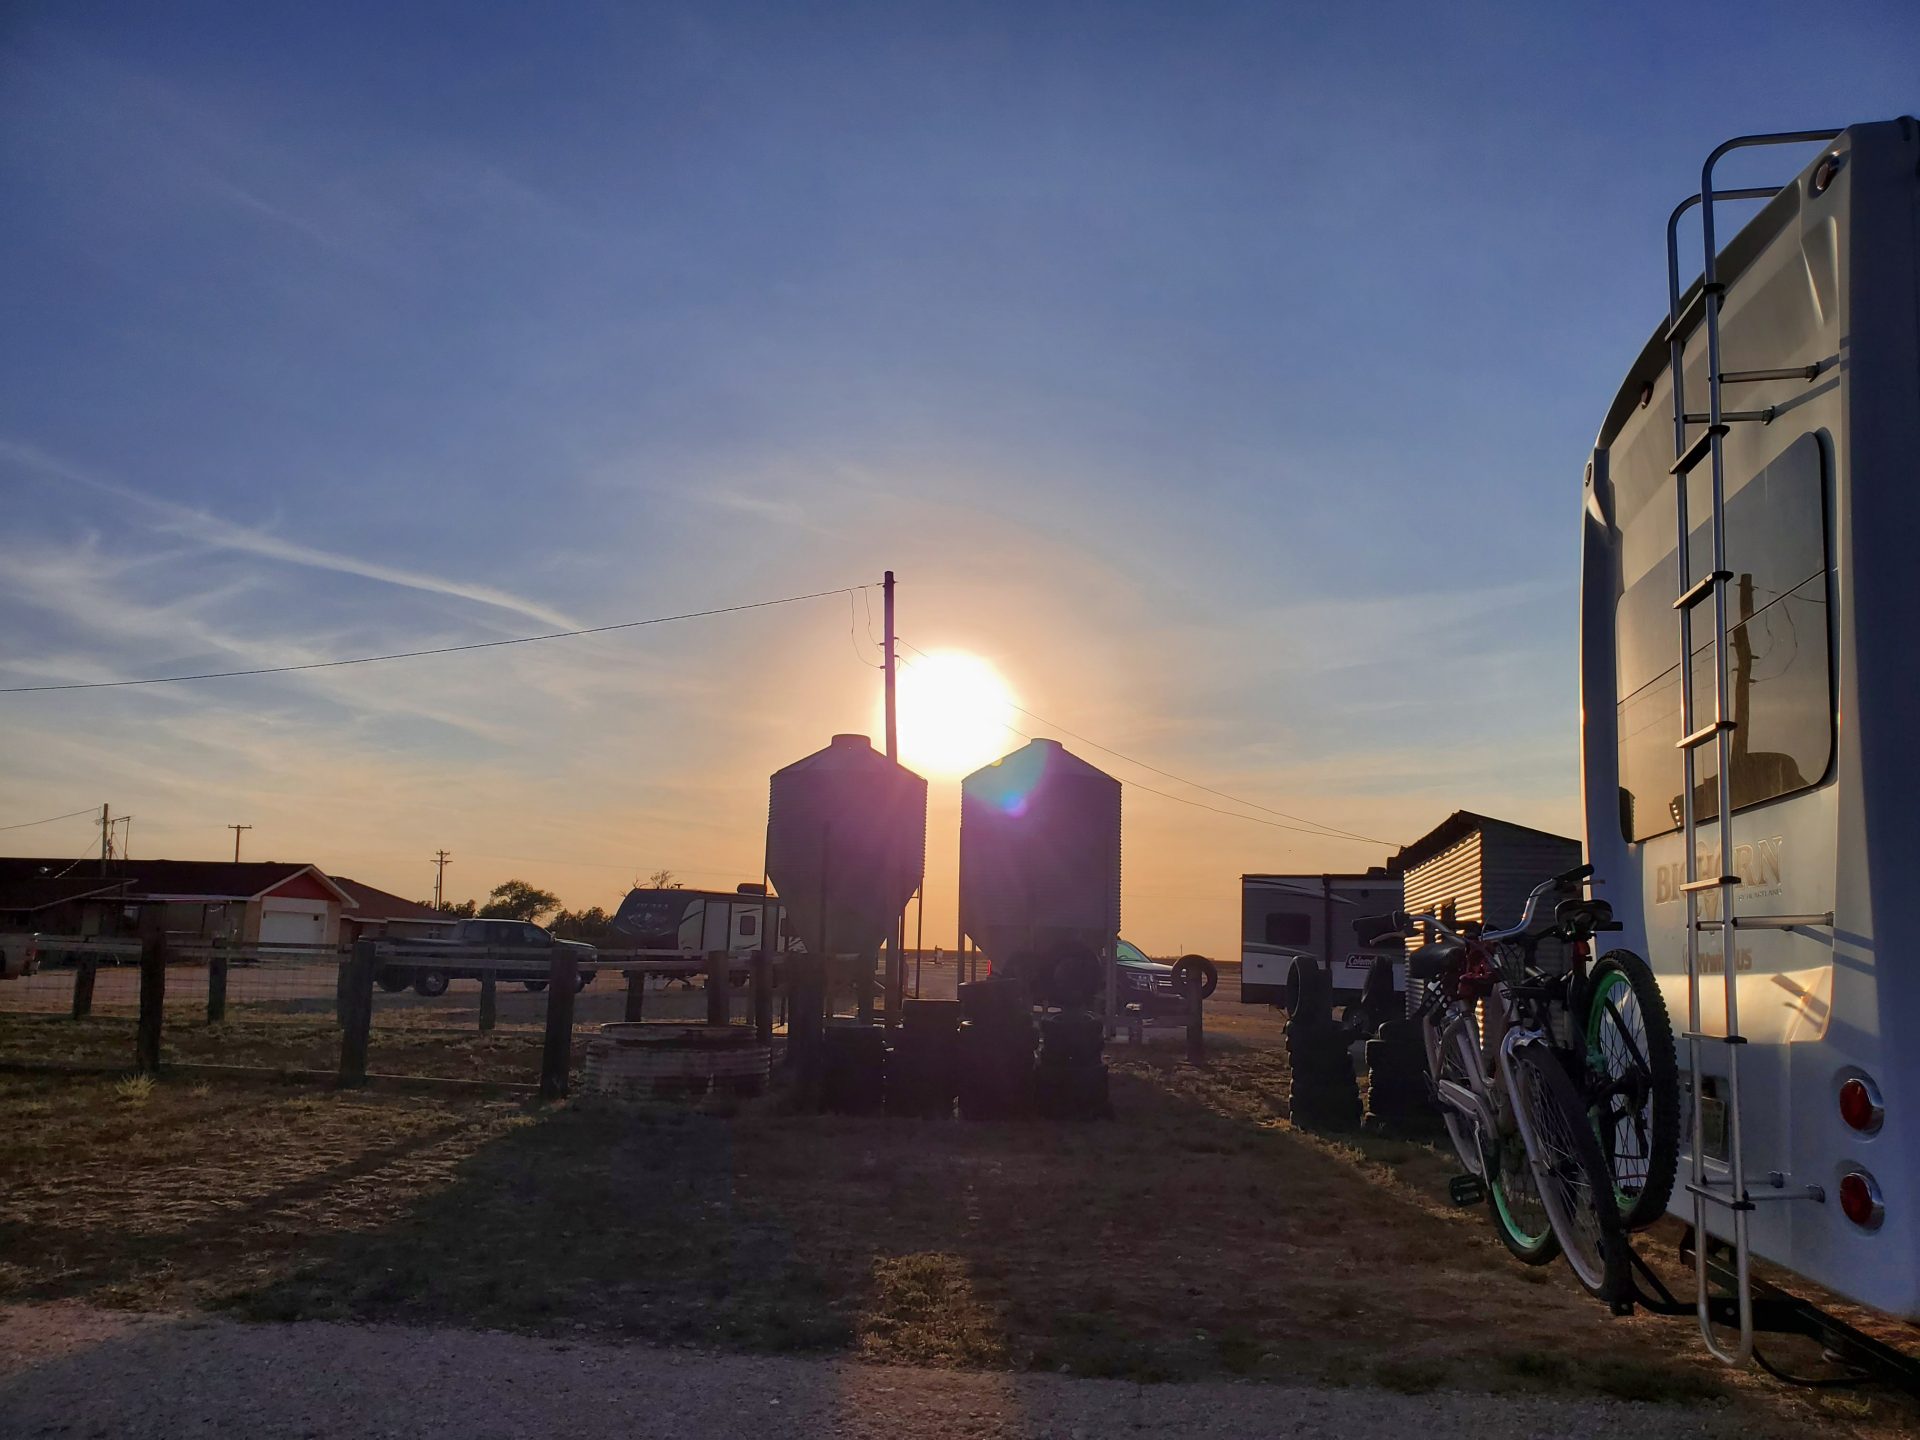 Sunset at Silos RV Park in Canyon TX